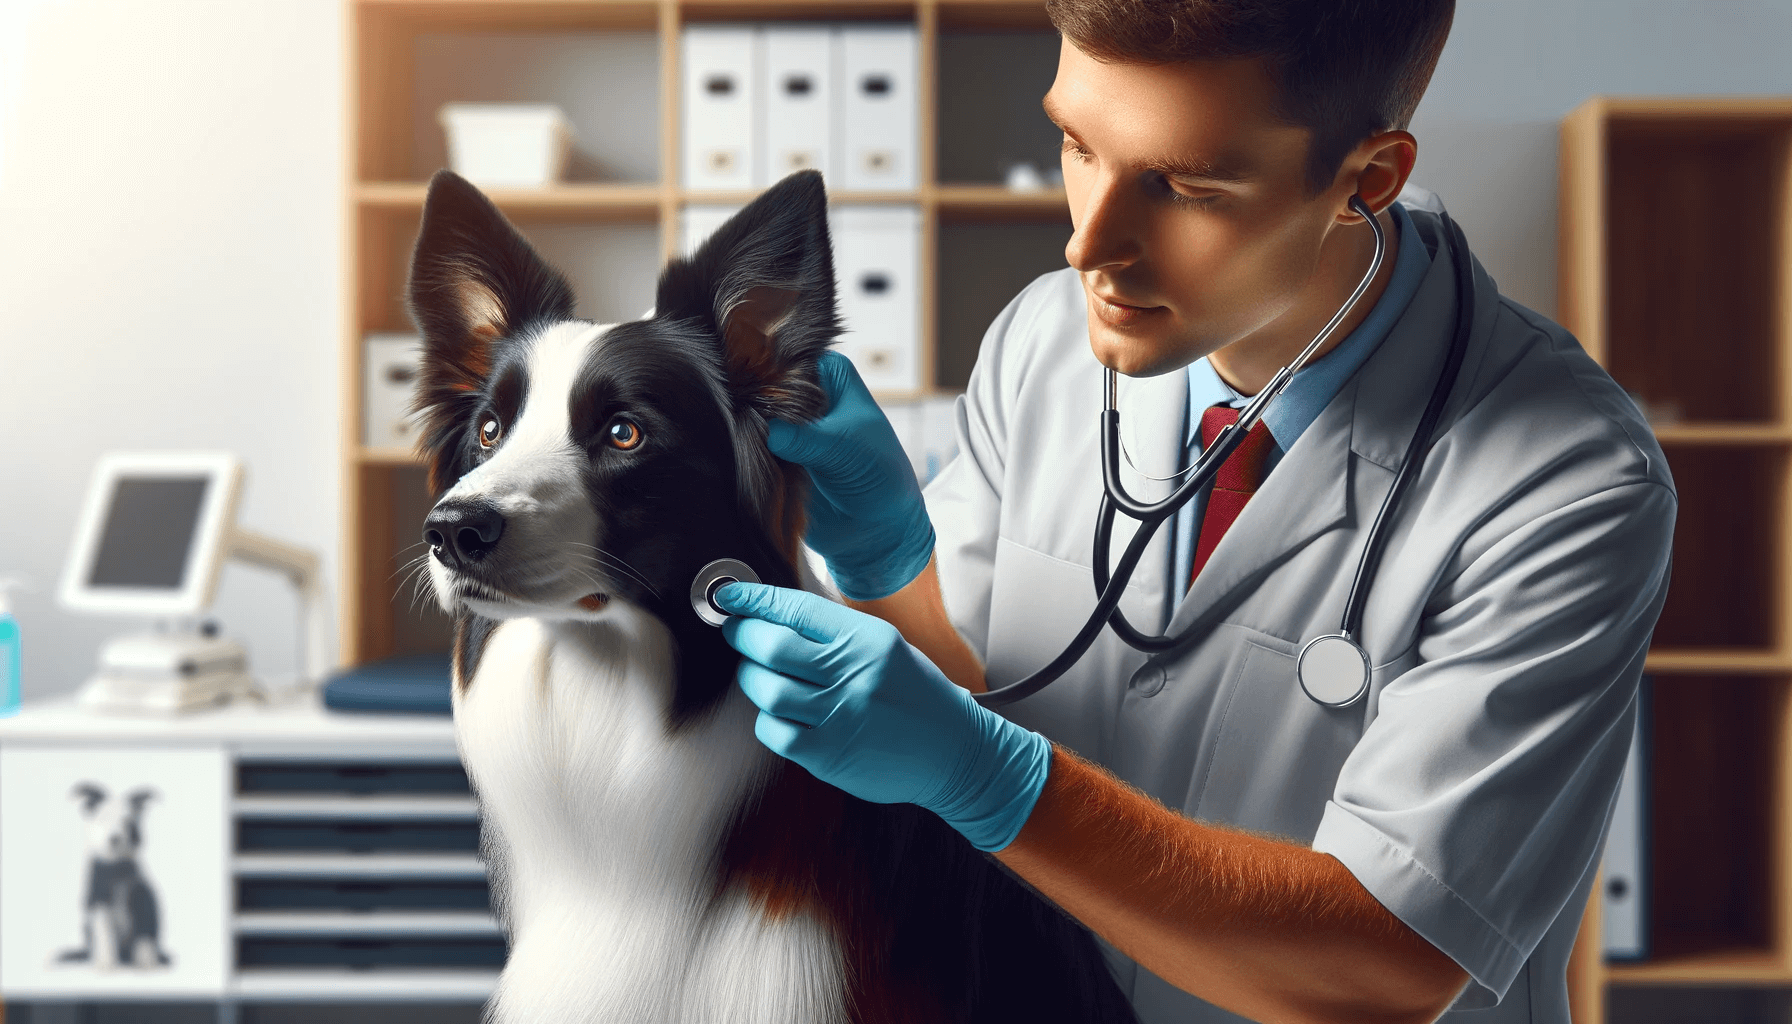 Smooth Coat Border Collie receiving a health check from a veterinarian.